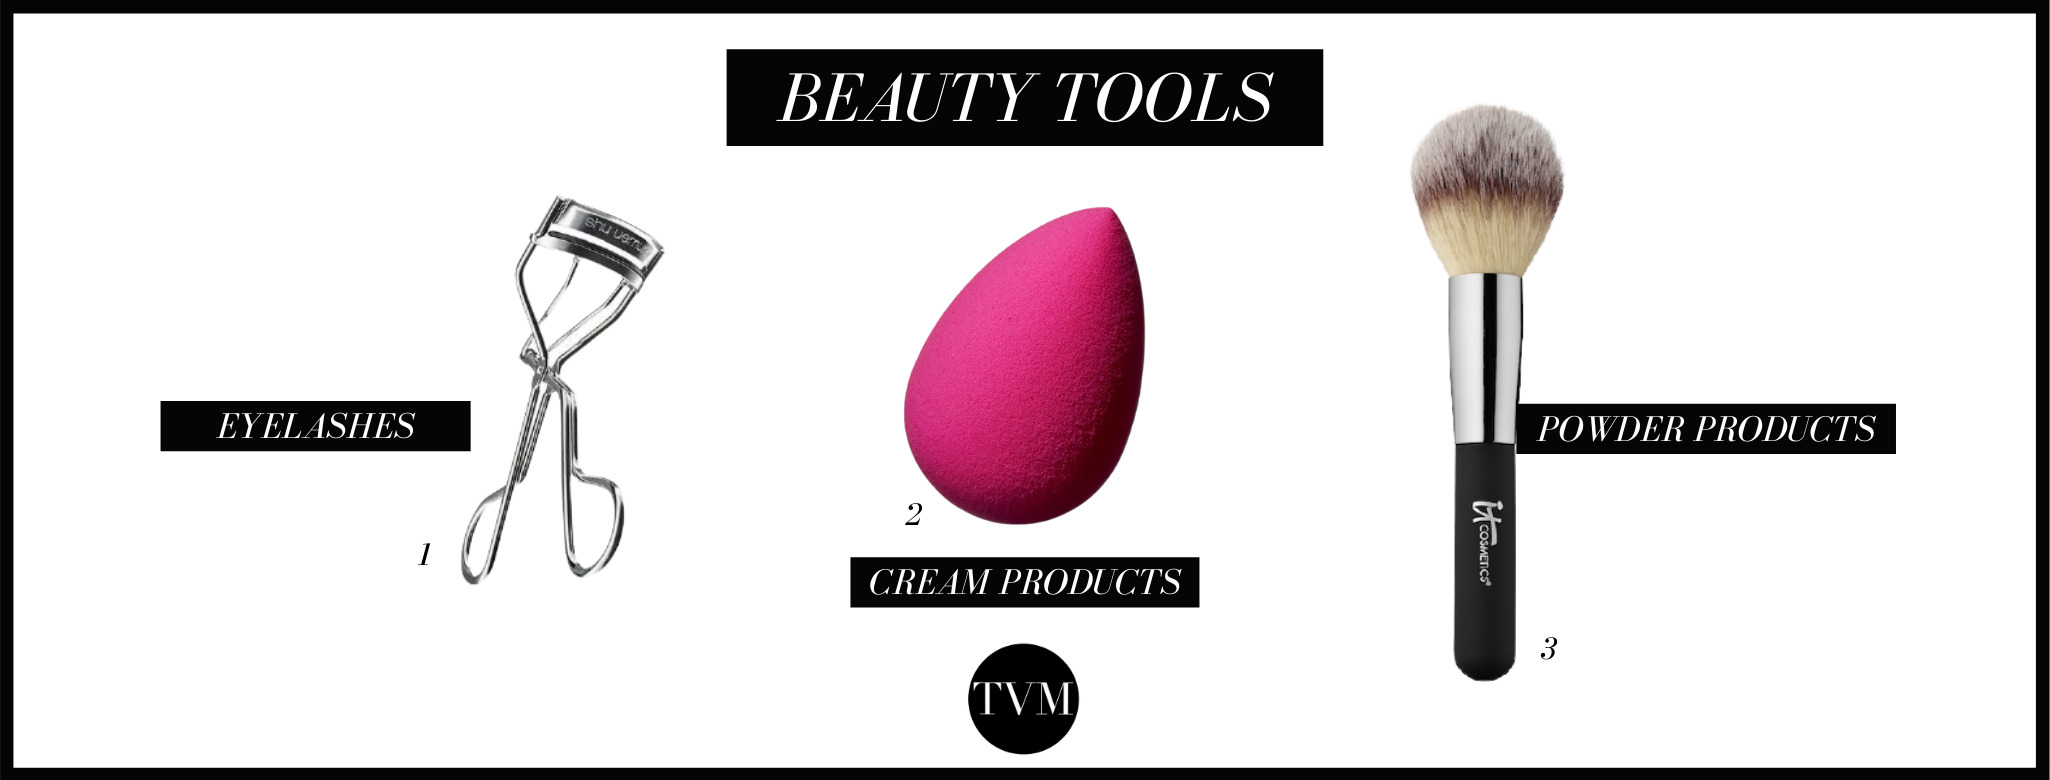 Beauty tools are super necessary! We firmly believe that having good beauty tools can revolutionize your makeup look - plus, it is 100% more hygienic! Keep in mind: It is not essential to have a bag full of makeup brushes! You only need some powder brushes - the ones from It cosmetics are great. On a more affordable spectrum, you can substitute it for some Real Techniques ones! The ICONIC beauty blender is 100% worth buying! It will make such a difference when applying your concealer and foundation! Nothing compares! Last but not least, you need an eyelash curler! This is the best-kept secret to achieve some massive eyelashes! If you don't believe it, try it!